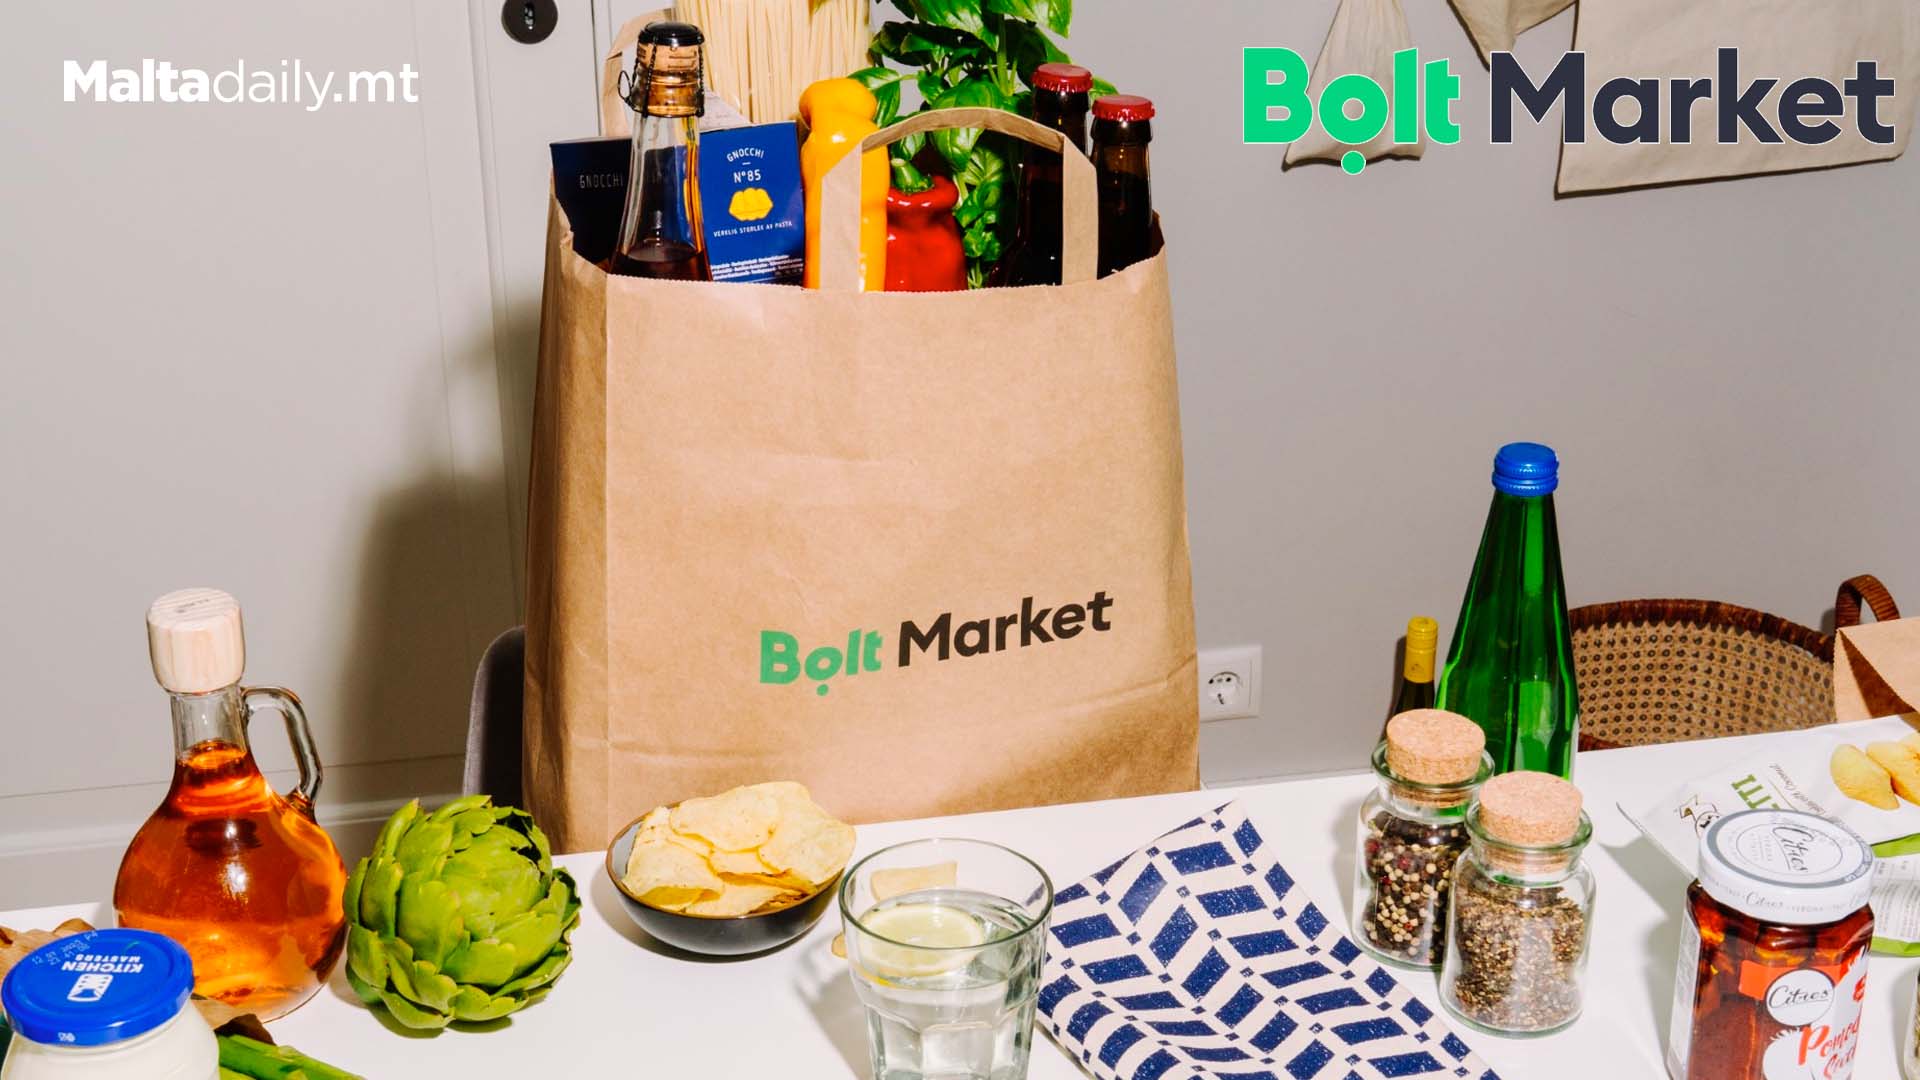 Bolt Market adds 1,000 new products to its offering